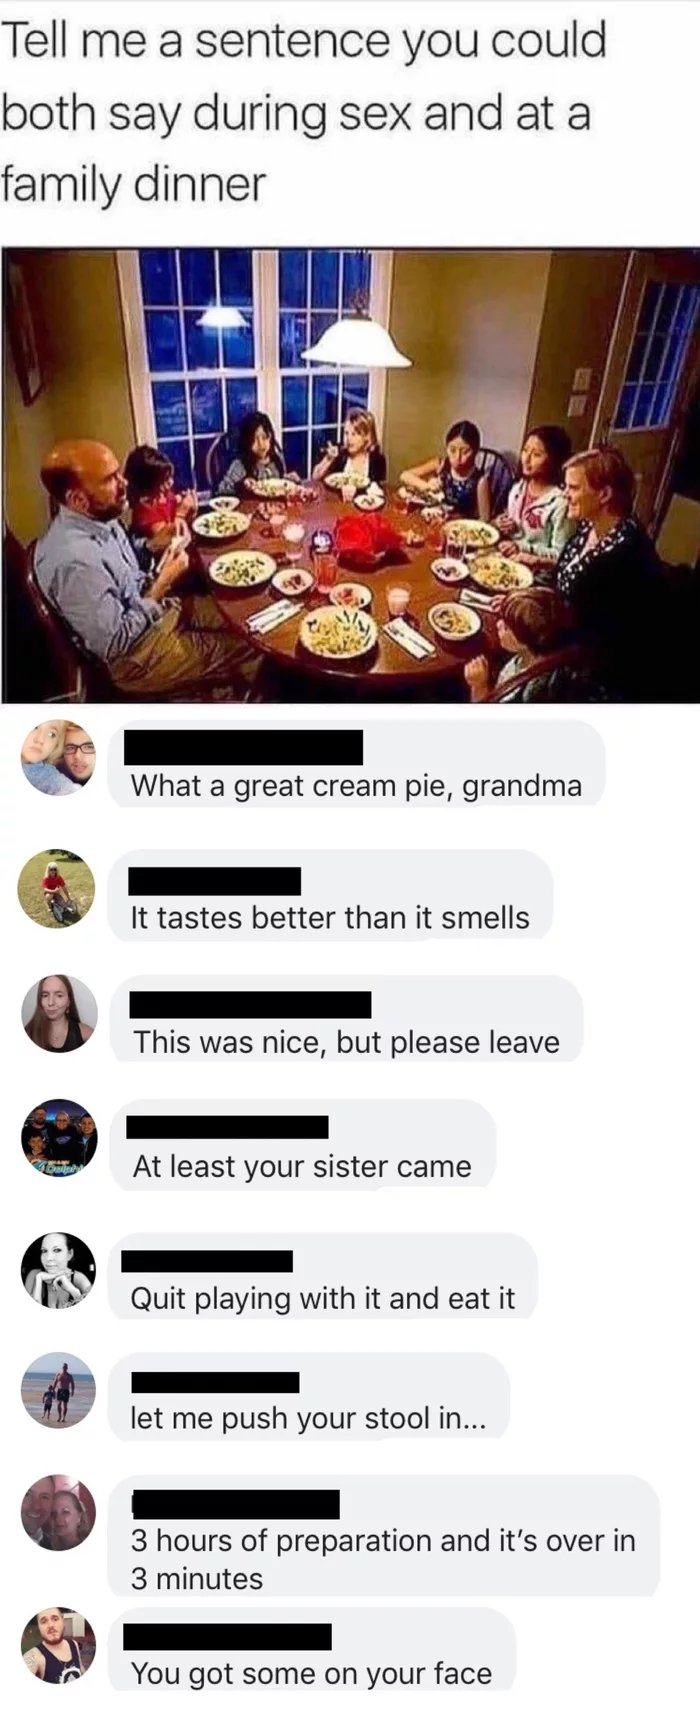 something you can say while having sex - Tell me a sentence you could both say during sex and at a family dinner What a great cream pie, grandma It tastes better than it smells This was nice, but please leave At least your sister came Quit playing with it